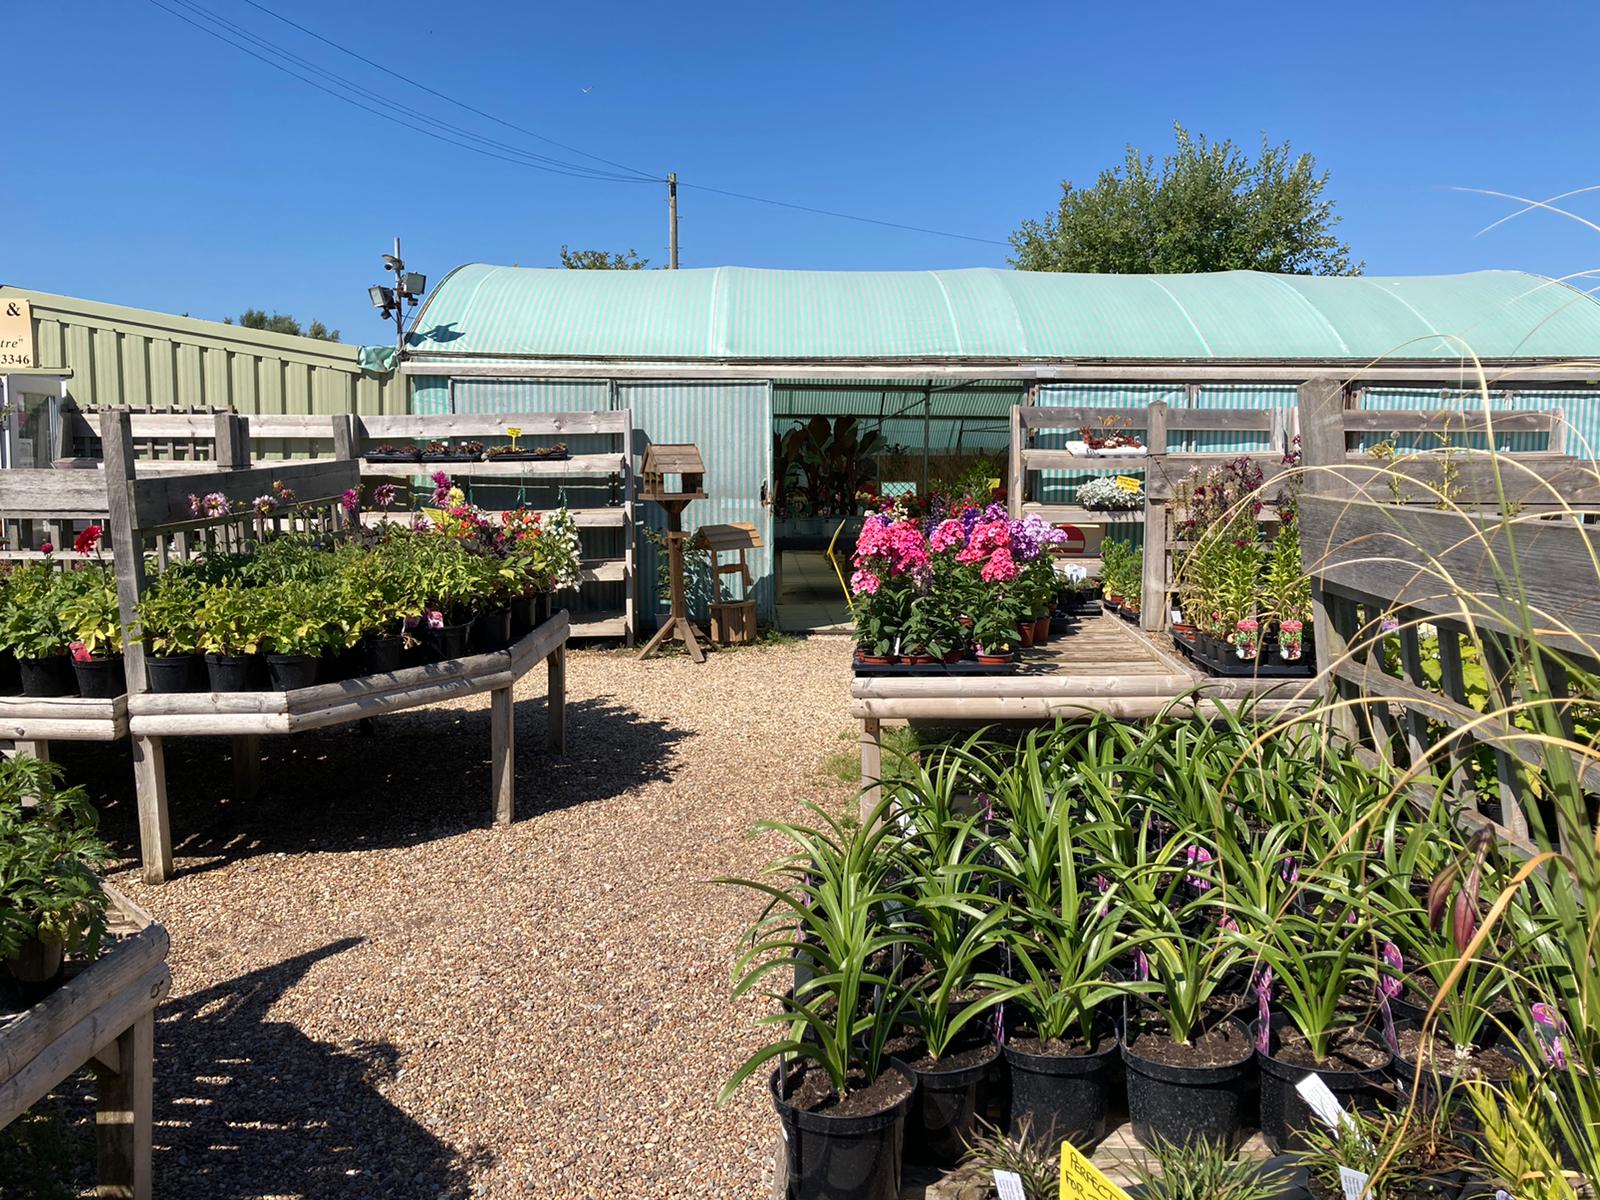 Pete Cook, manager of Chalcroft Nurseries near Bognor Regis is not surprised the town is one of the driest in England (PA)